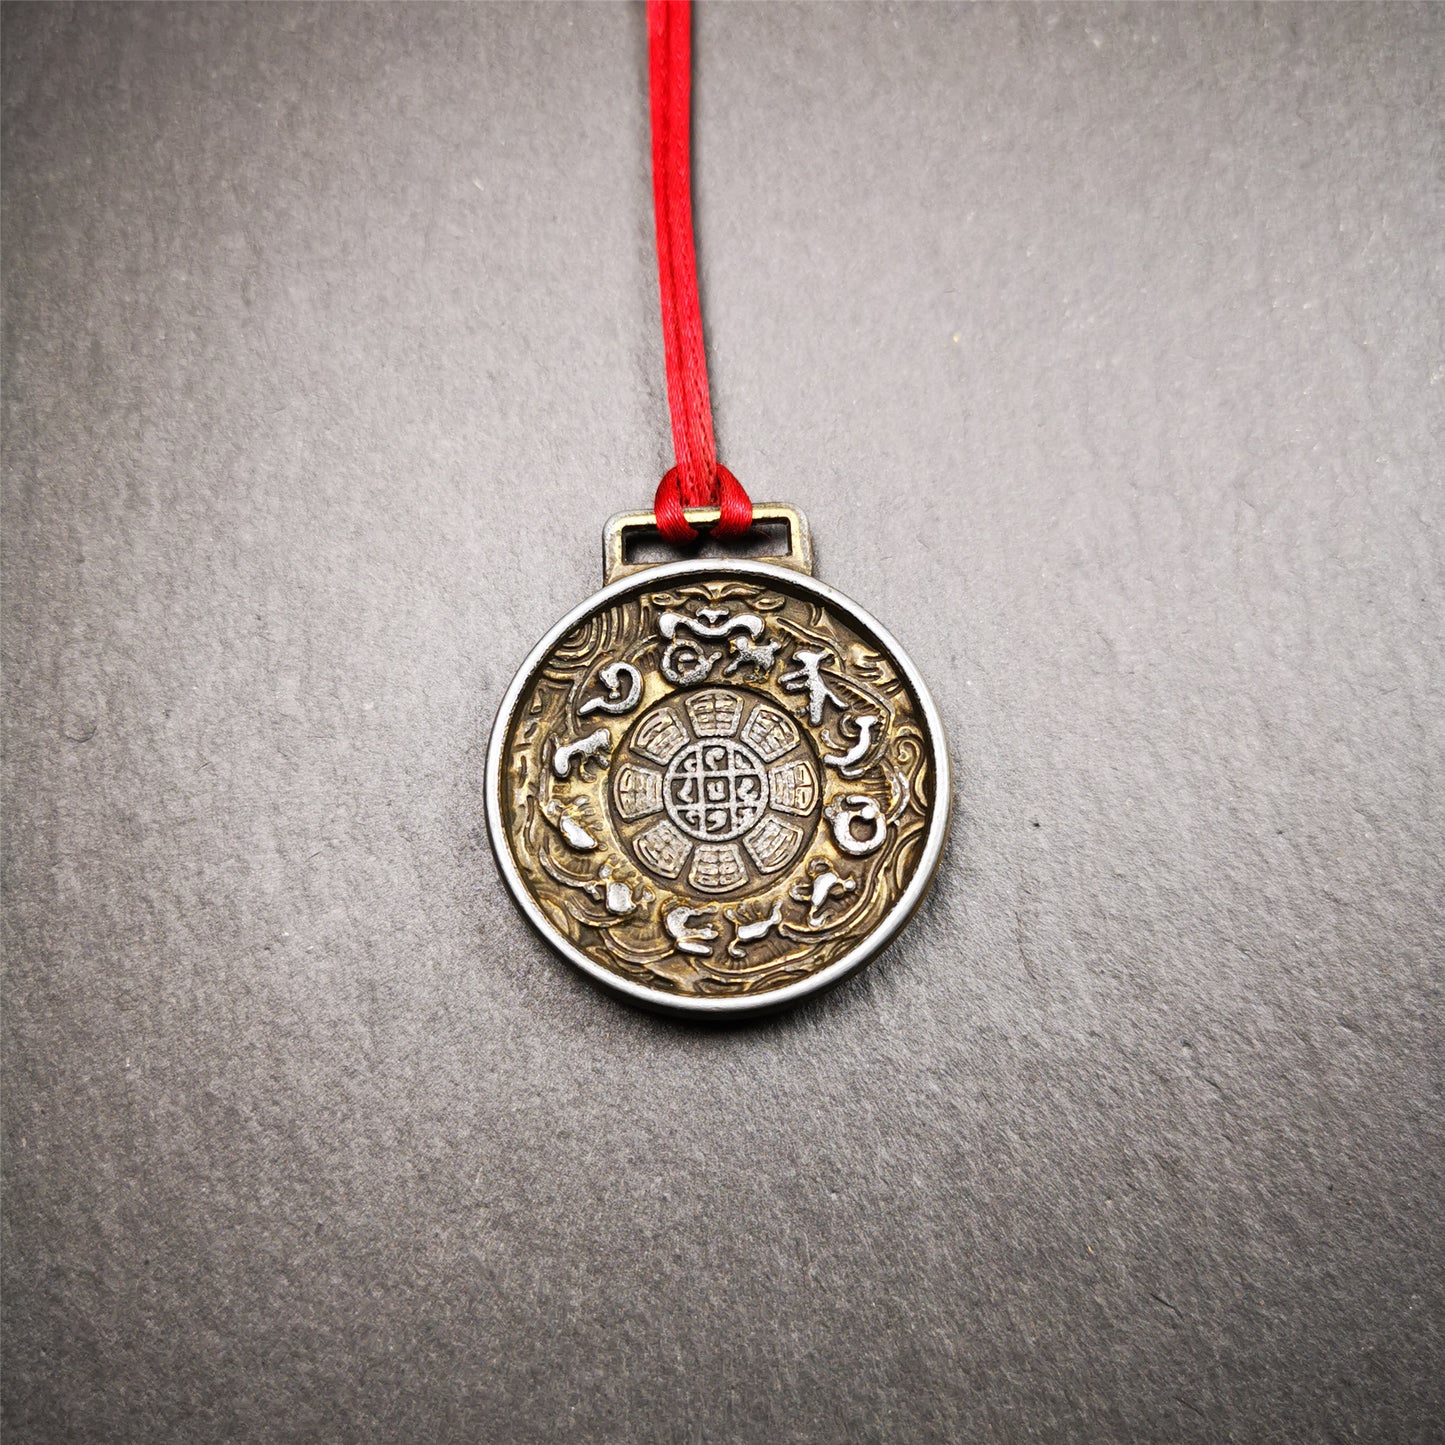 This set of sipaho badge was made by Tibetan craftsmen and come from Hepo Town, Baiyu County,Tibet. It is round shape,made of white copper.The front pattern is Tibetan Budhist Protective Symbol - SIPAHO(srid pa ho),the back is the cross vajra symbol.